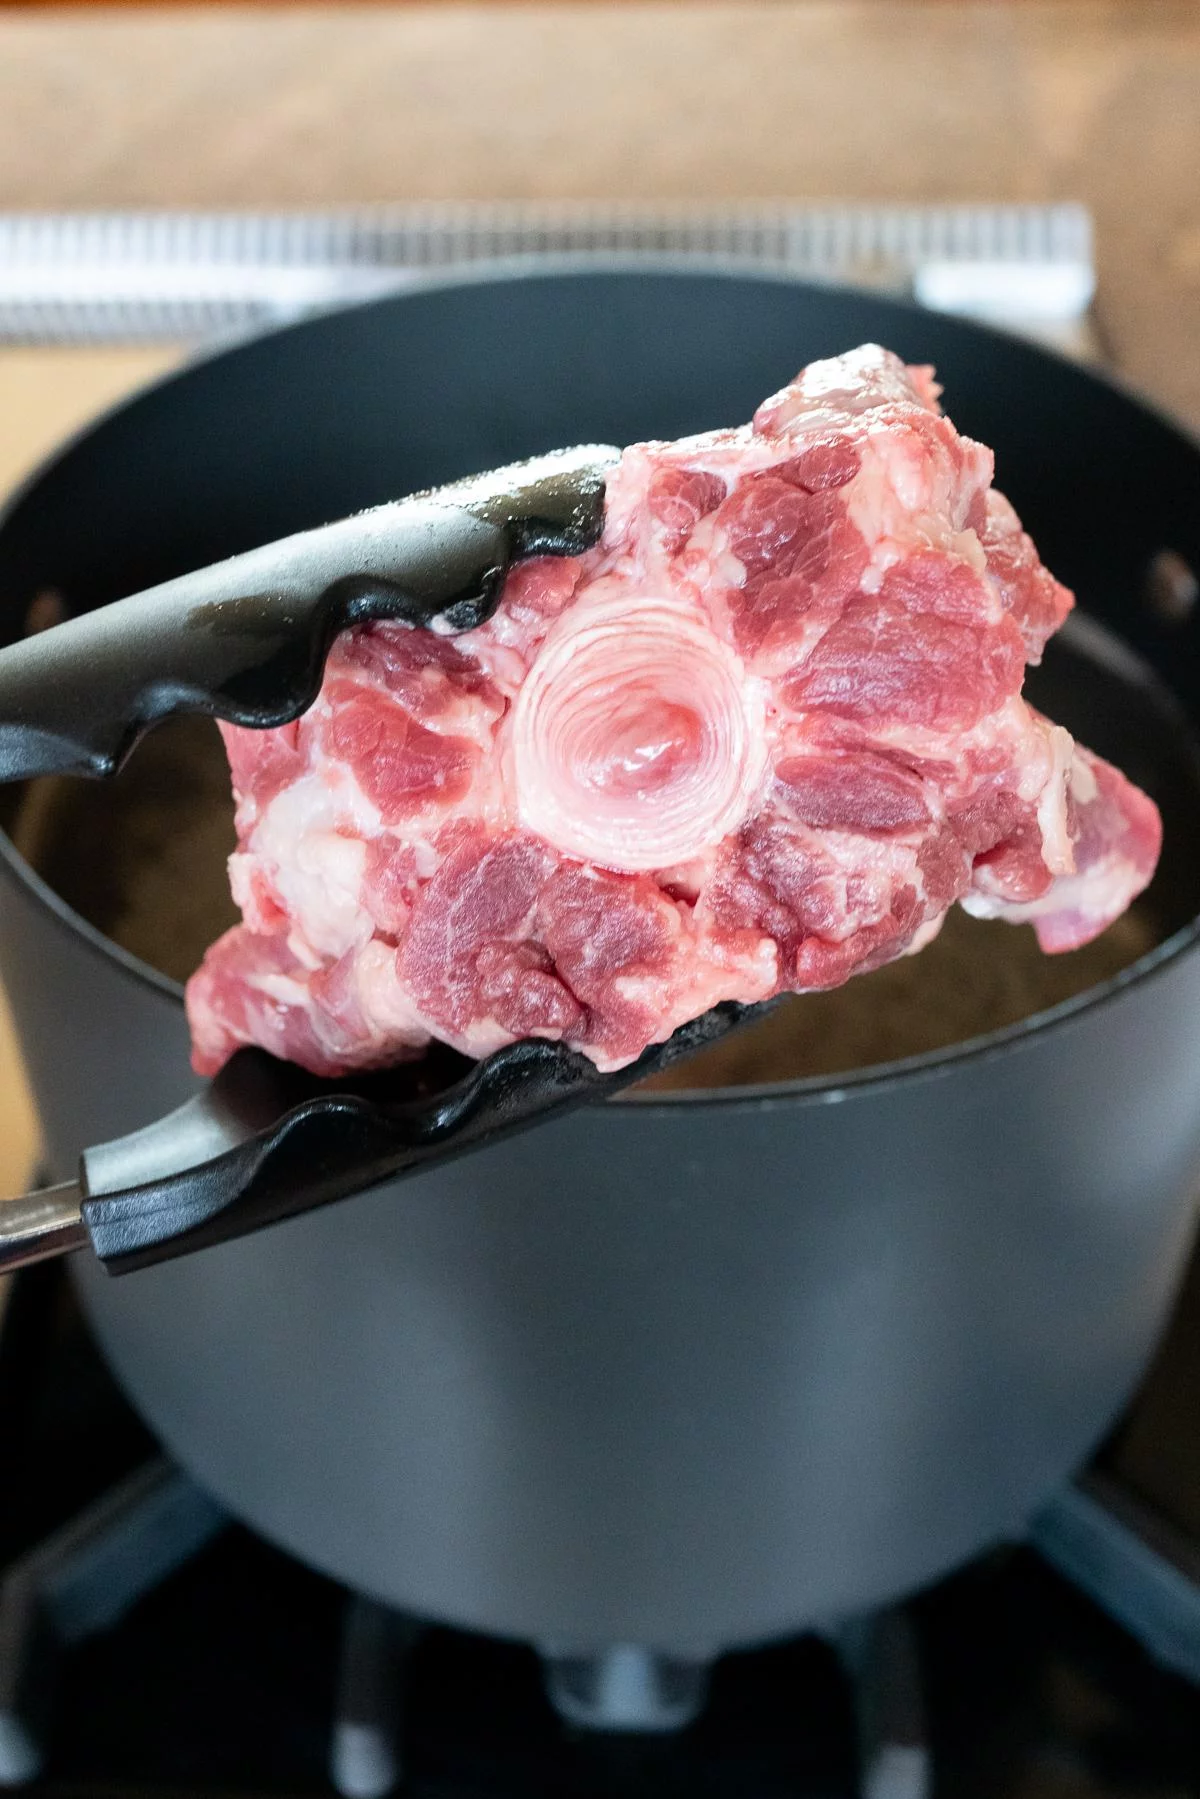 Placing an oxtail into the boiling water to parboil